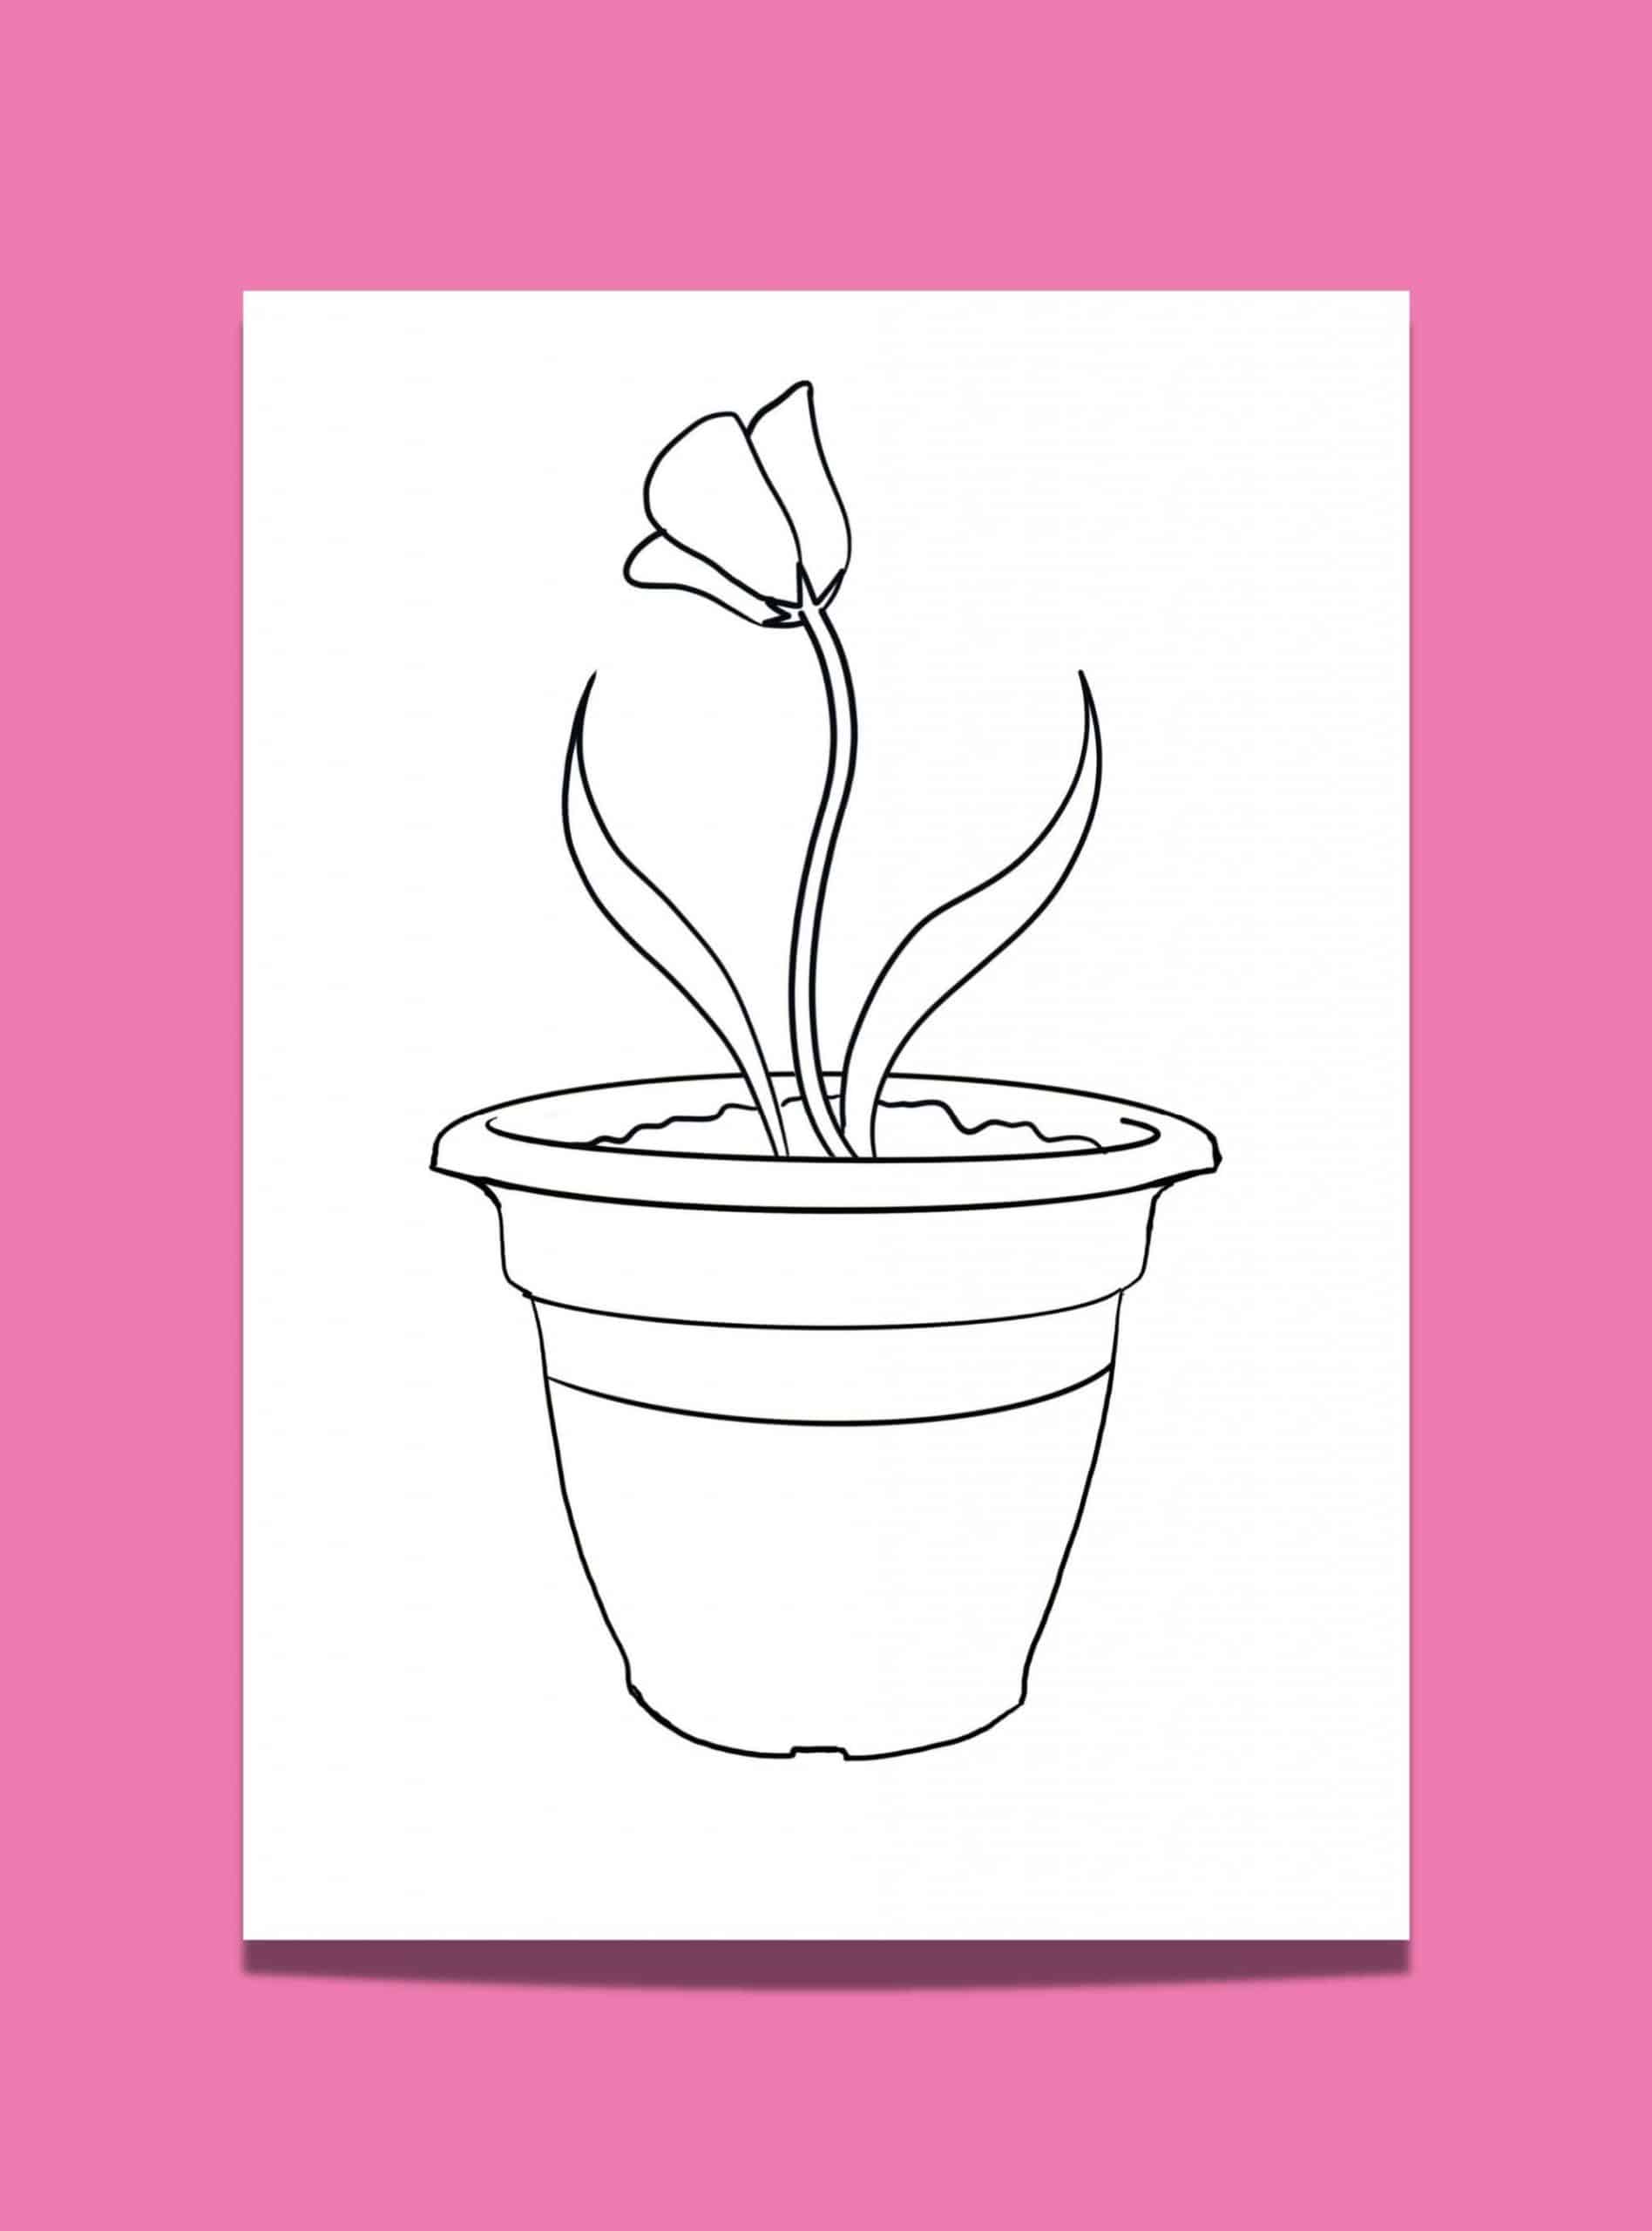 Get Ready to Bloom with Creativity! 13 Delightful Flower Pot Template